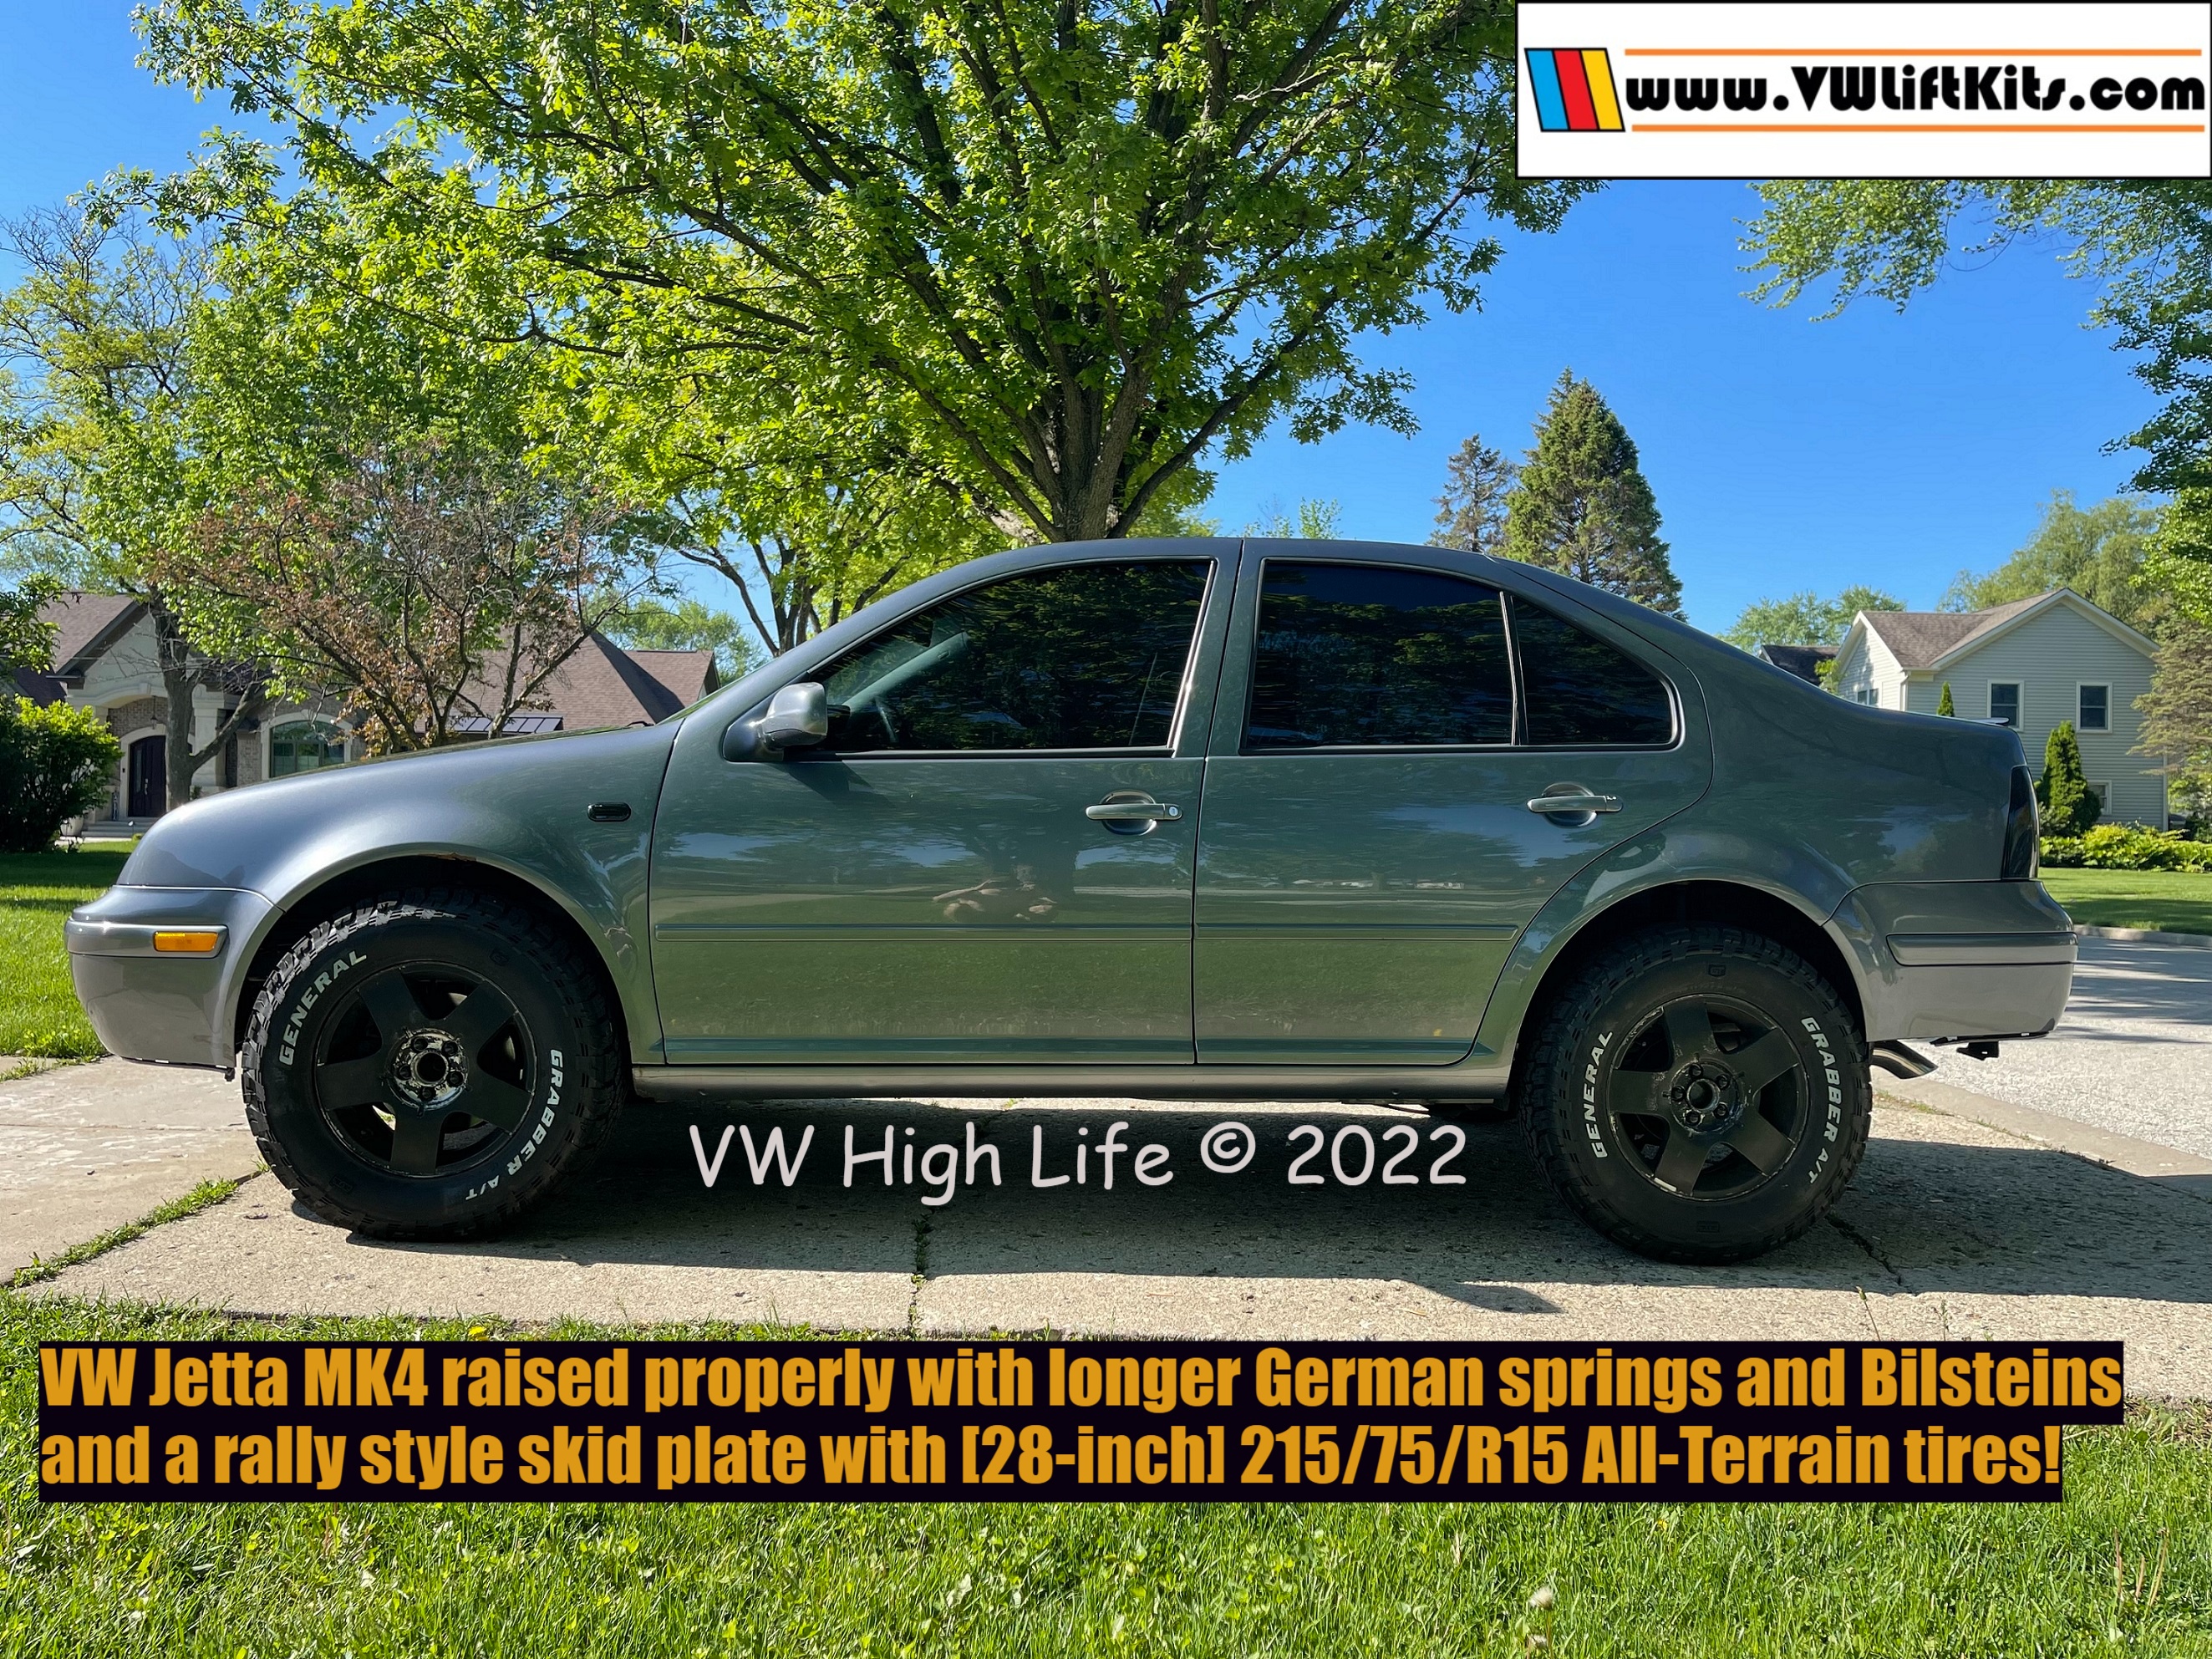 First VW Jetta MK4 lifted properly with Bilsteins and a Rally Style Skid Plate